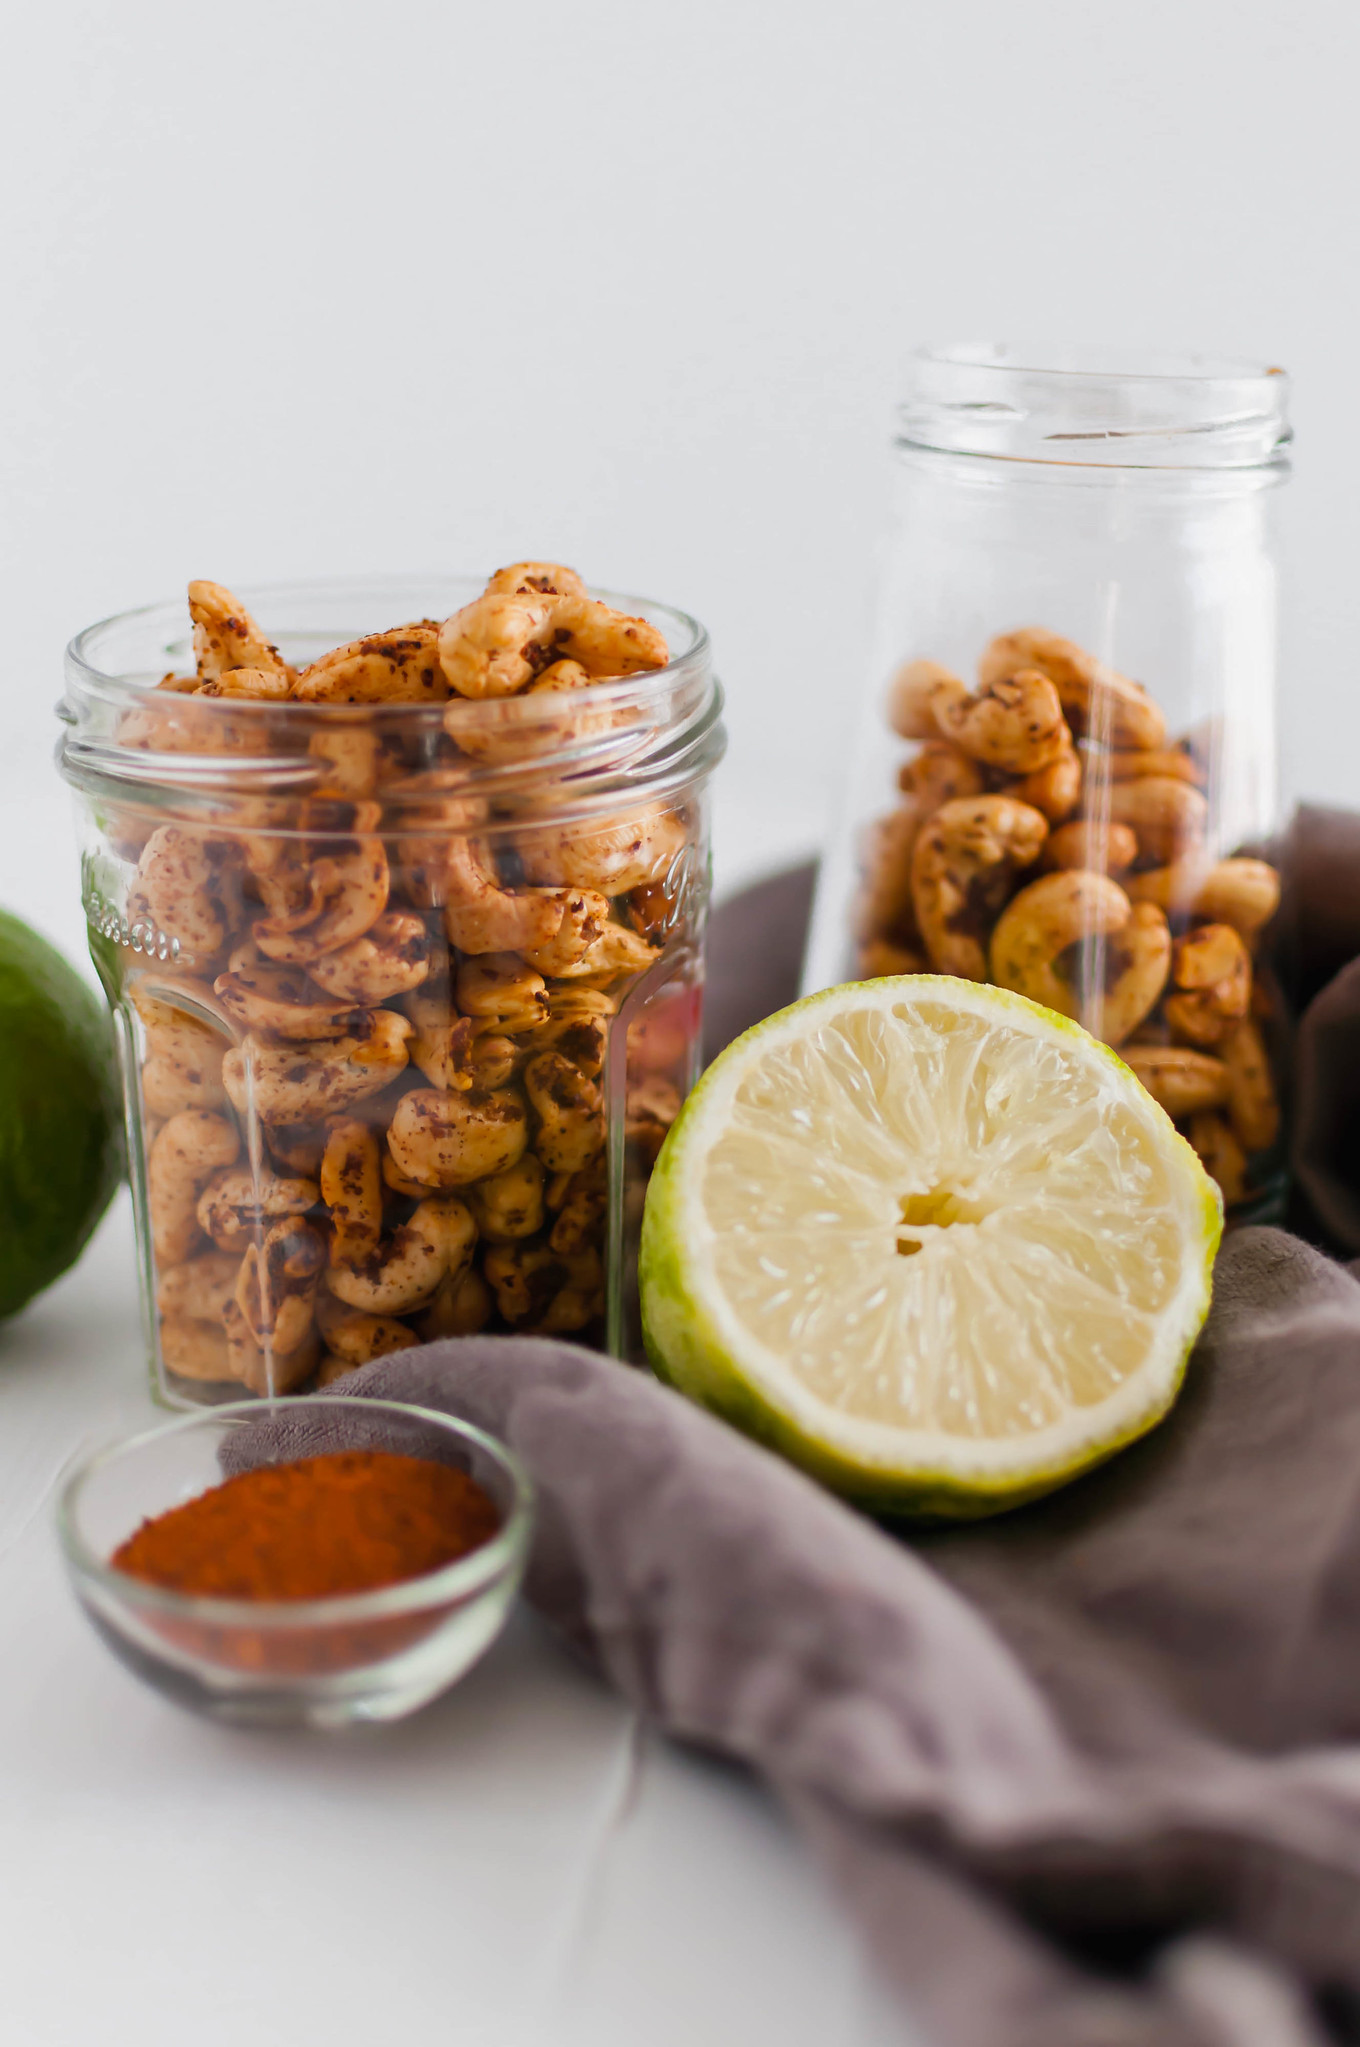 Meet your new snack addiction, Chili Lime Cashews. Spiced with chili powder, fresh lime zest and juice then roasted to crunchy perfection.